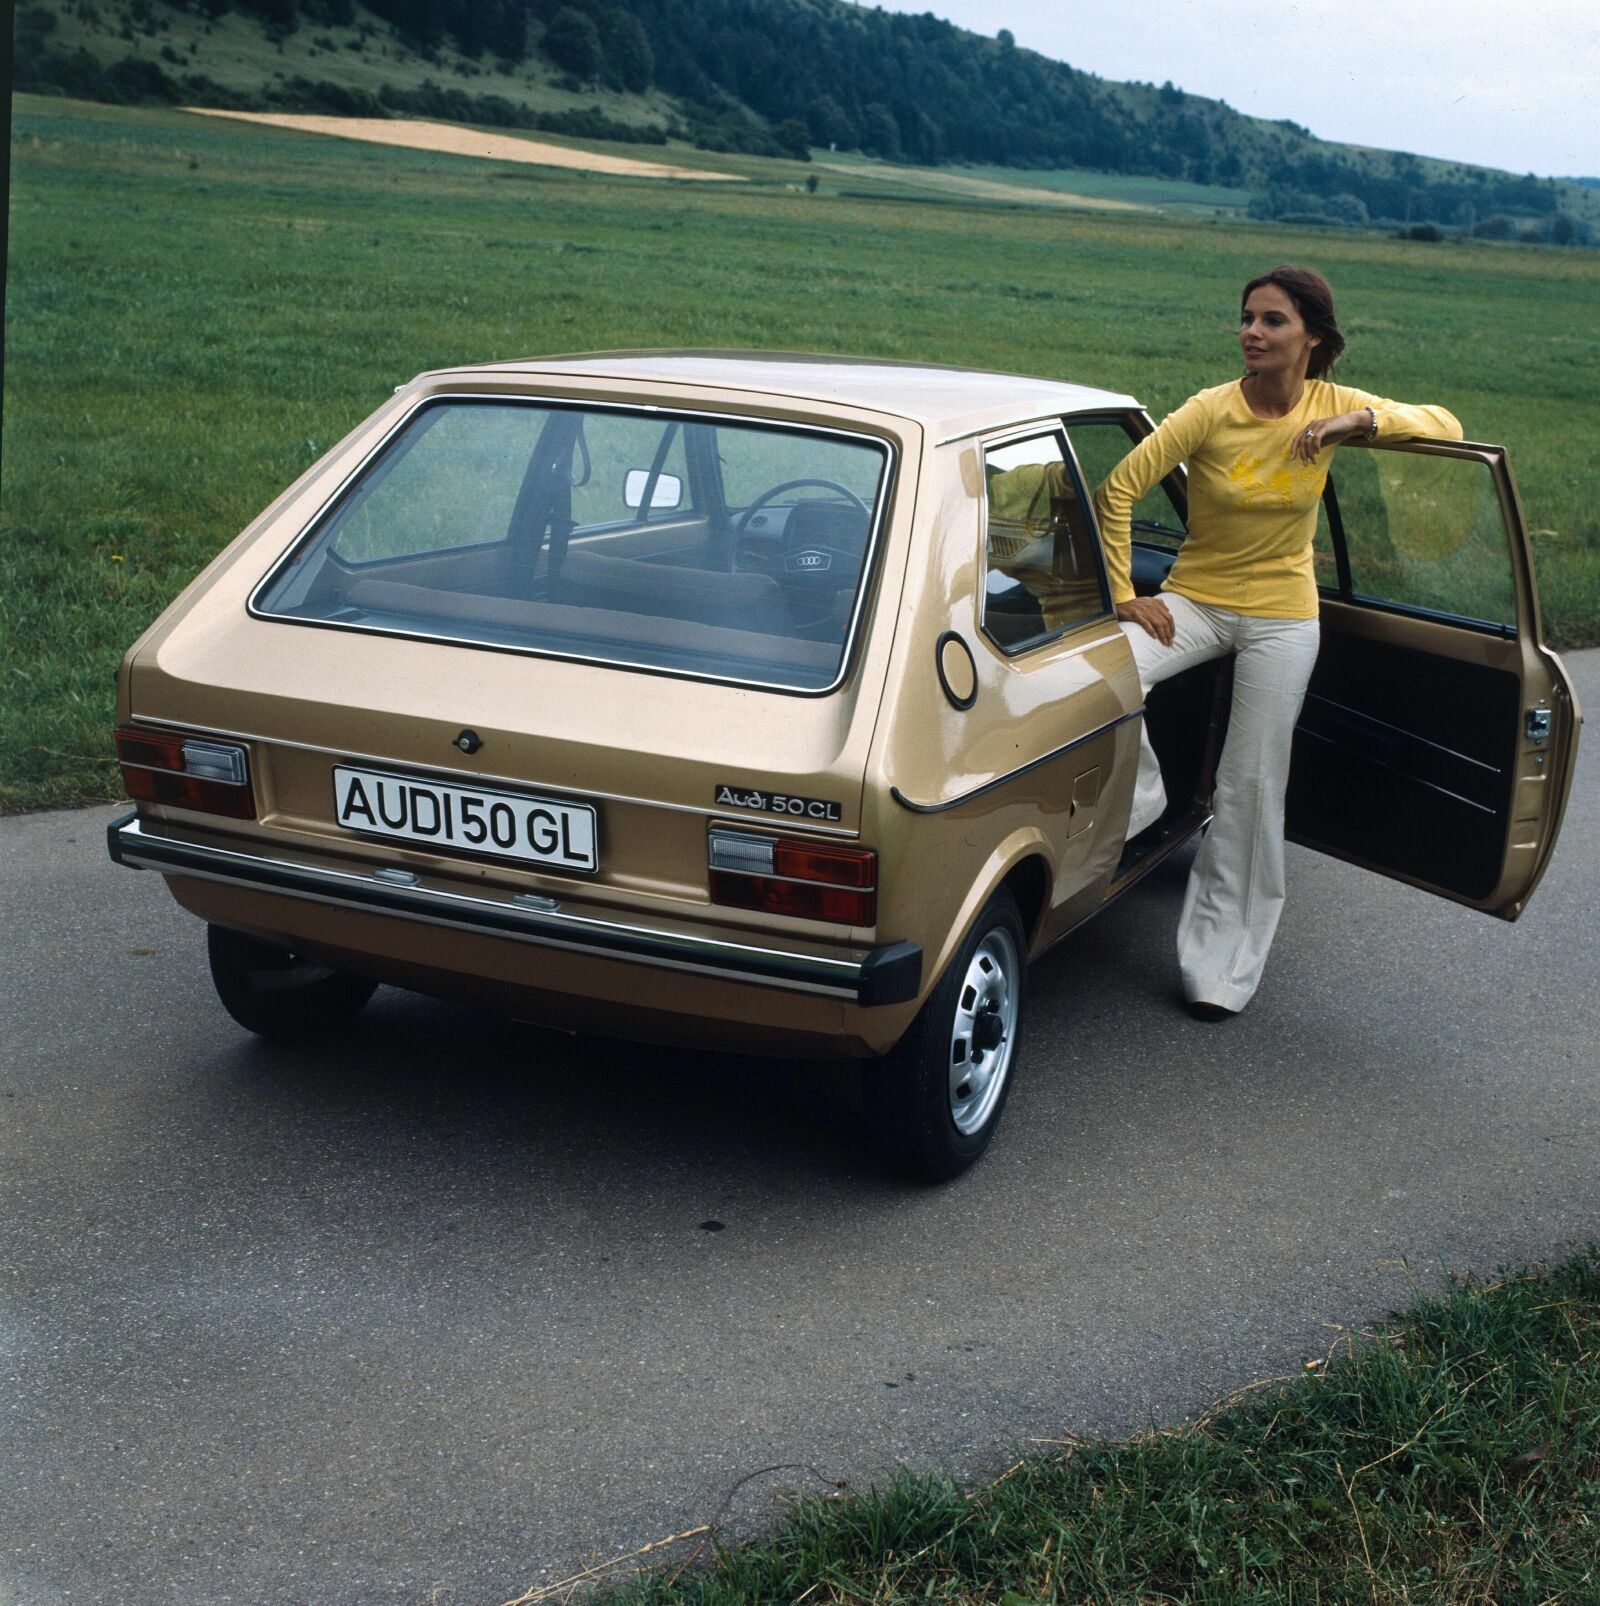 Germany’s first small car was launched 50 years ago